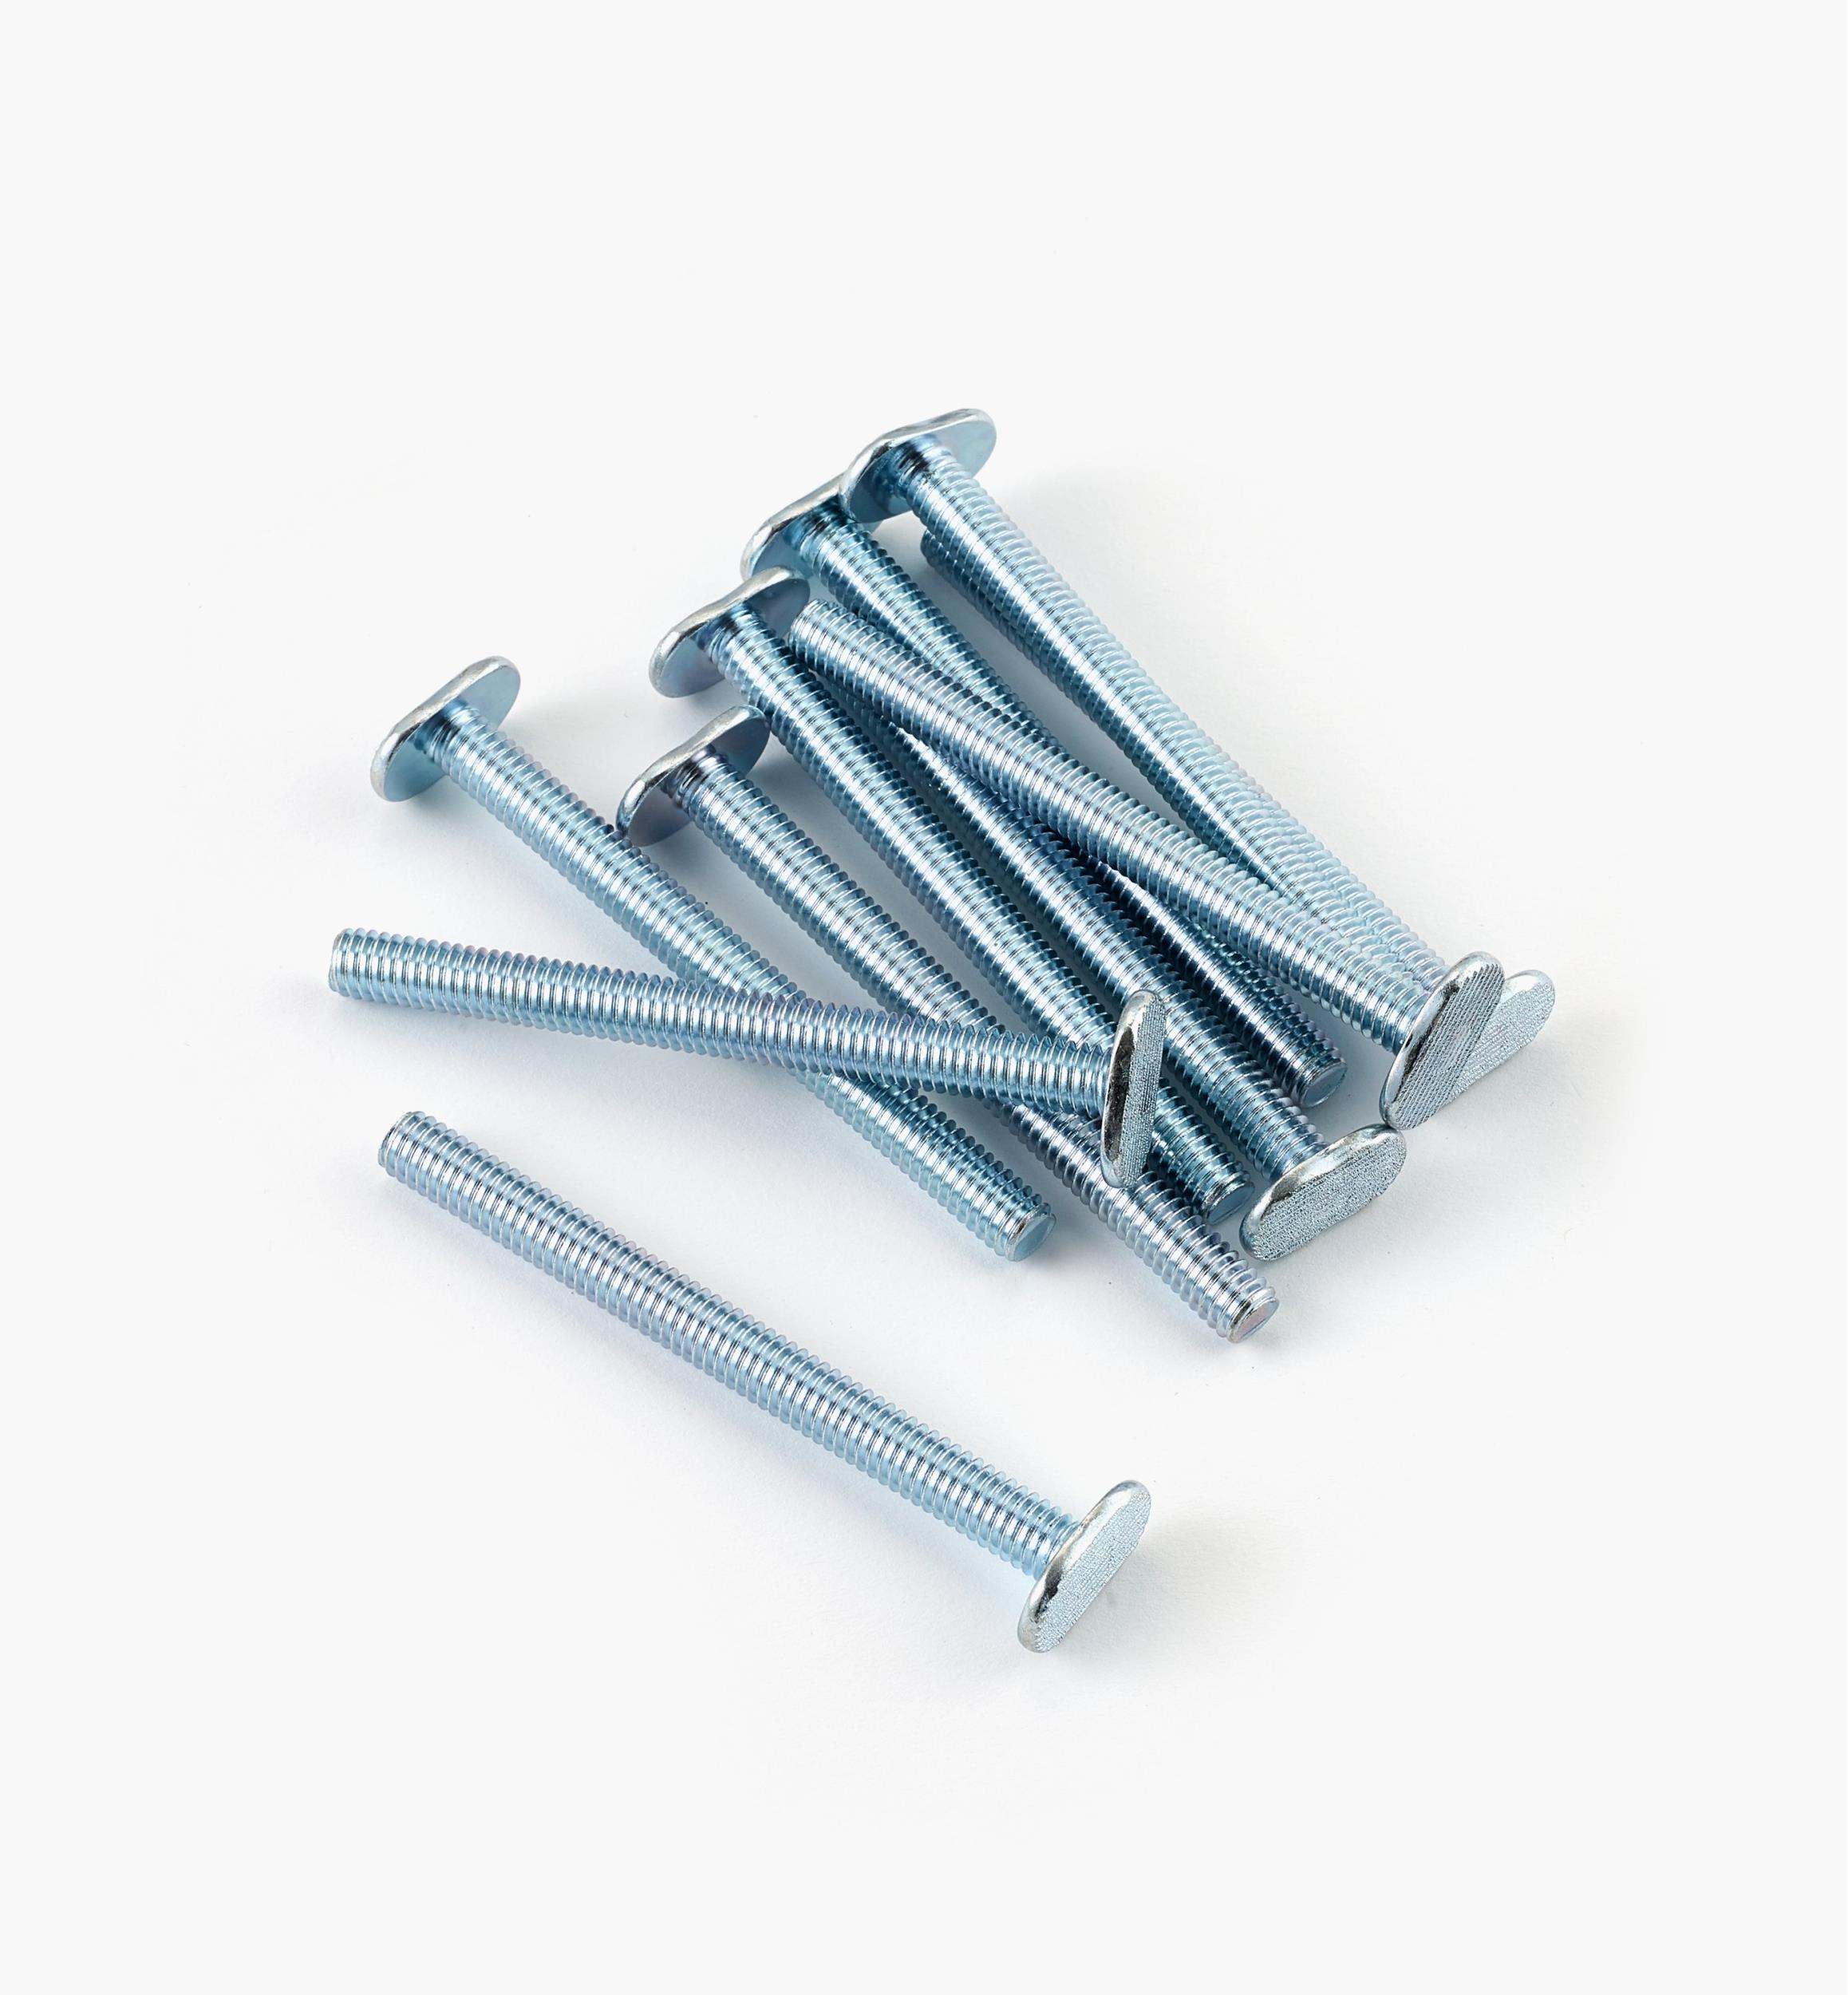 2 Each T Track 48/" Aluminum 3//4/" x 3//8/" for 1//4/" /& 5//16/" T Bolts /& 1//4/" Hex Bolt